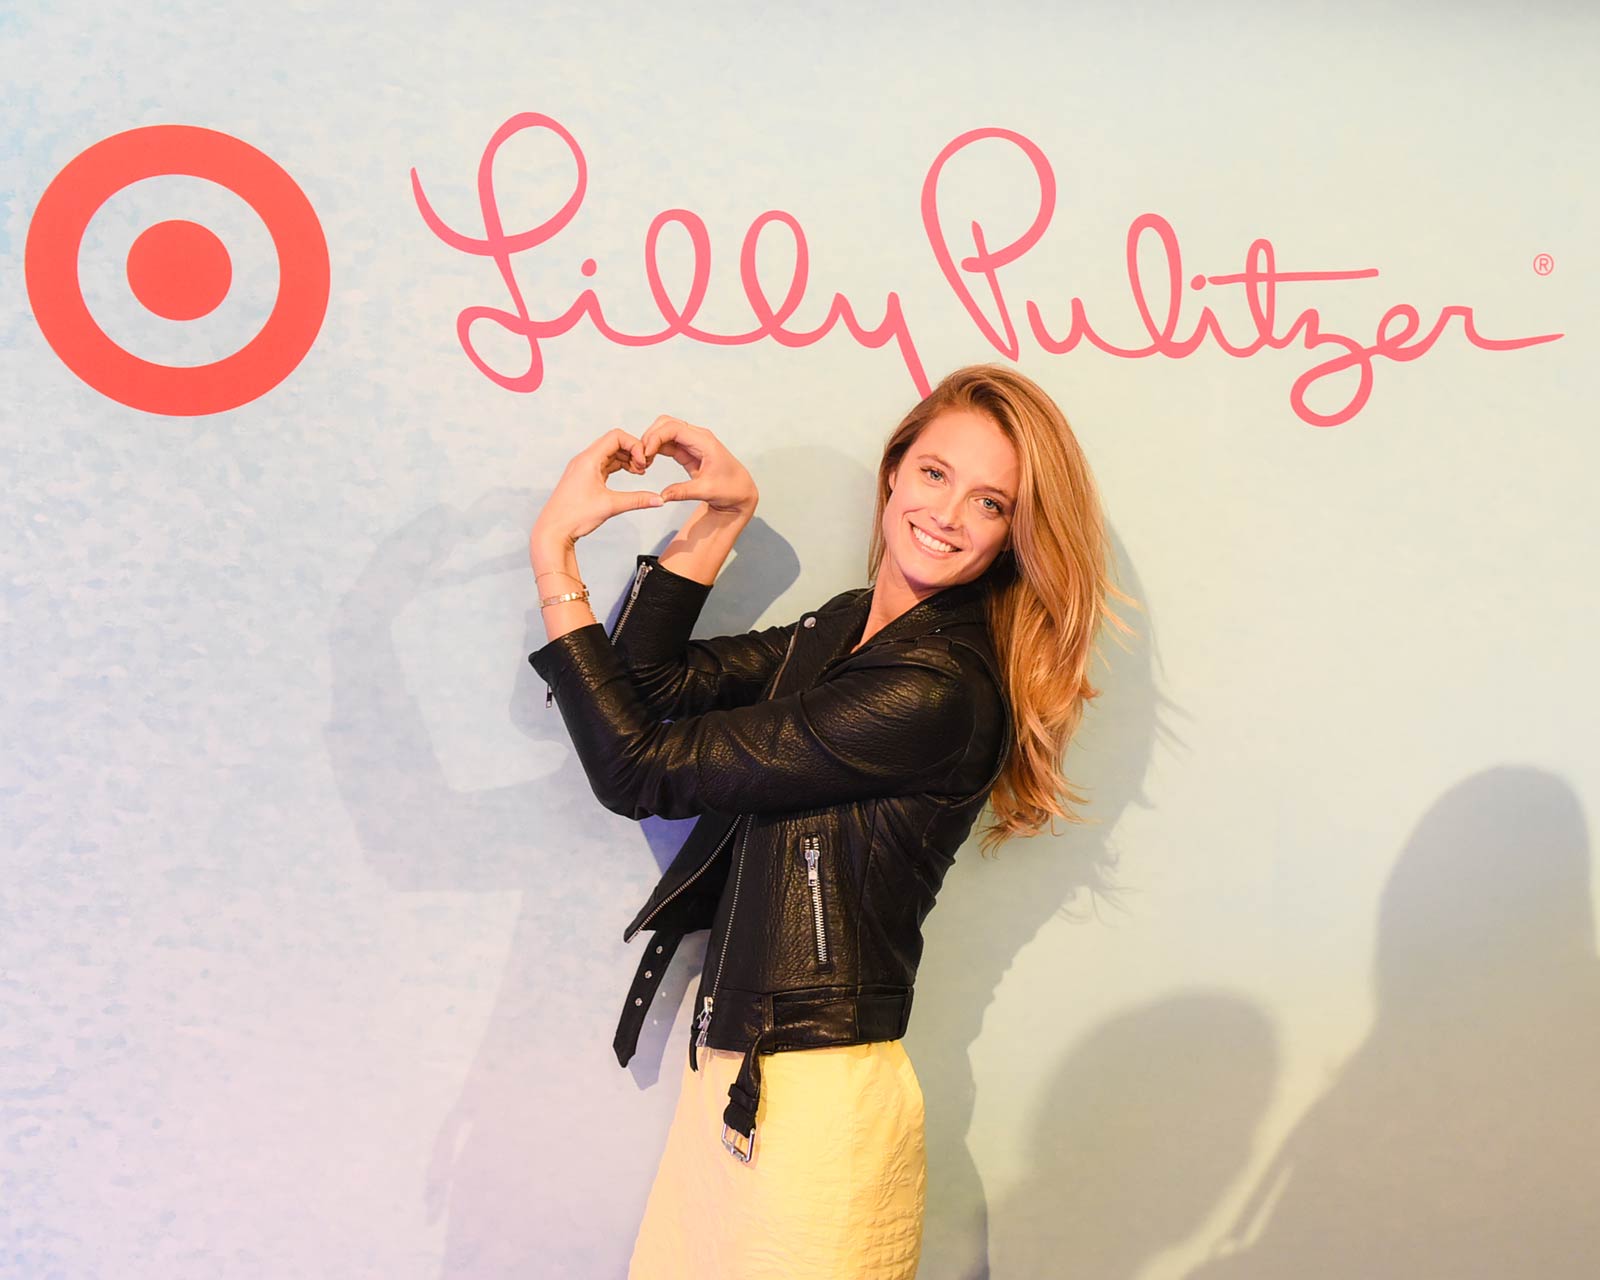 Kate Bock attends Lilly Pulitzer for Target event